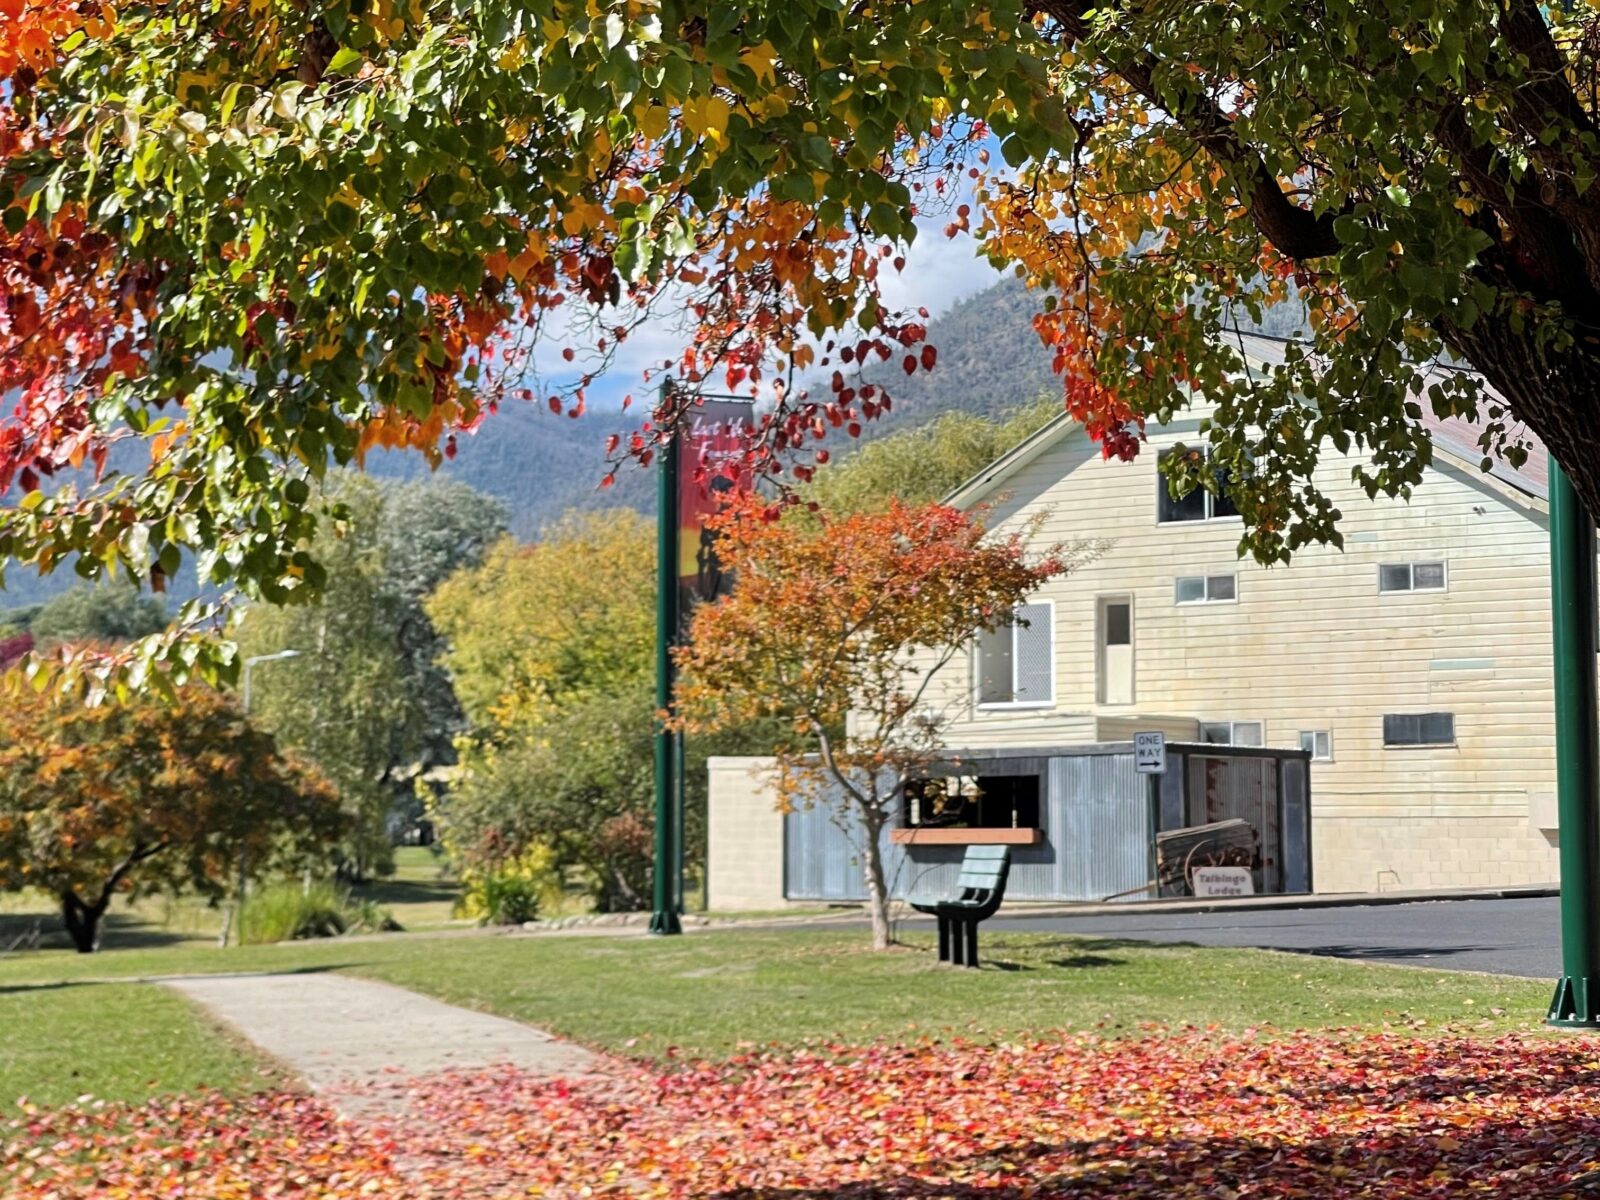 Outside view of Talbingo Lodge surrounded by Autumn leaves.